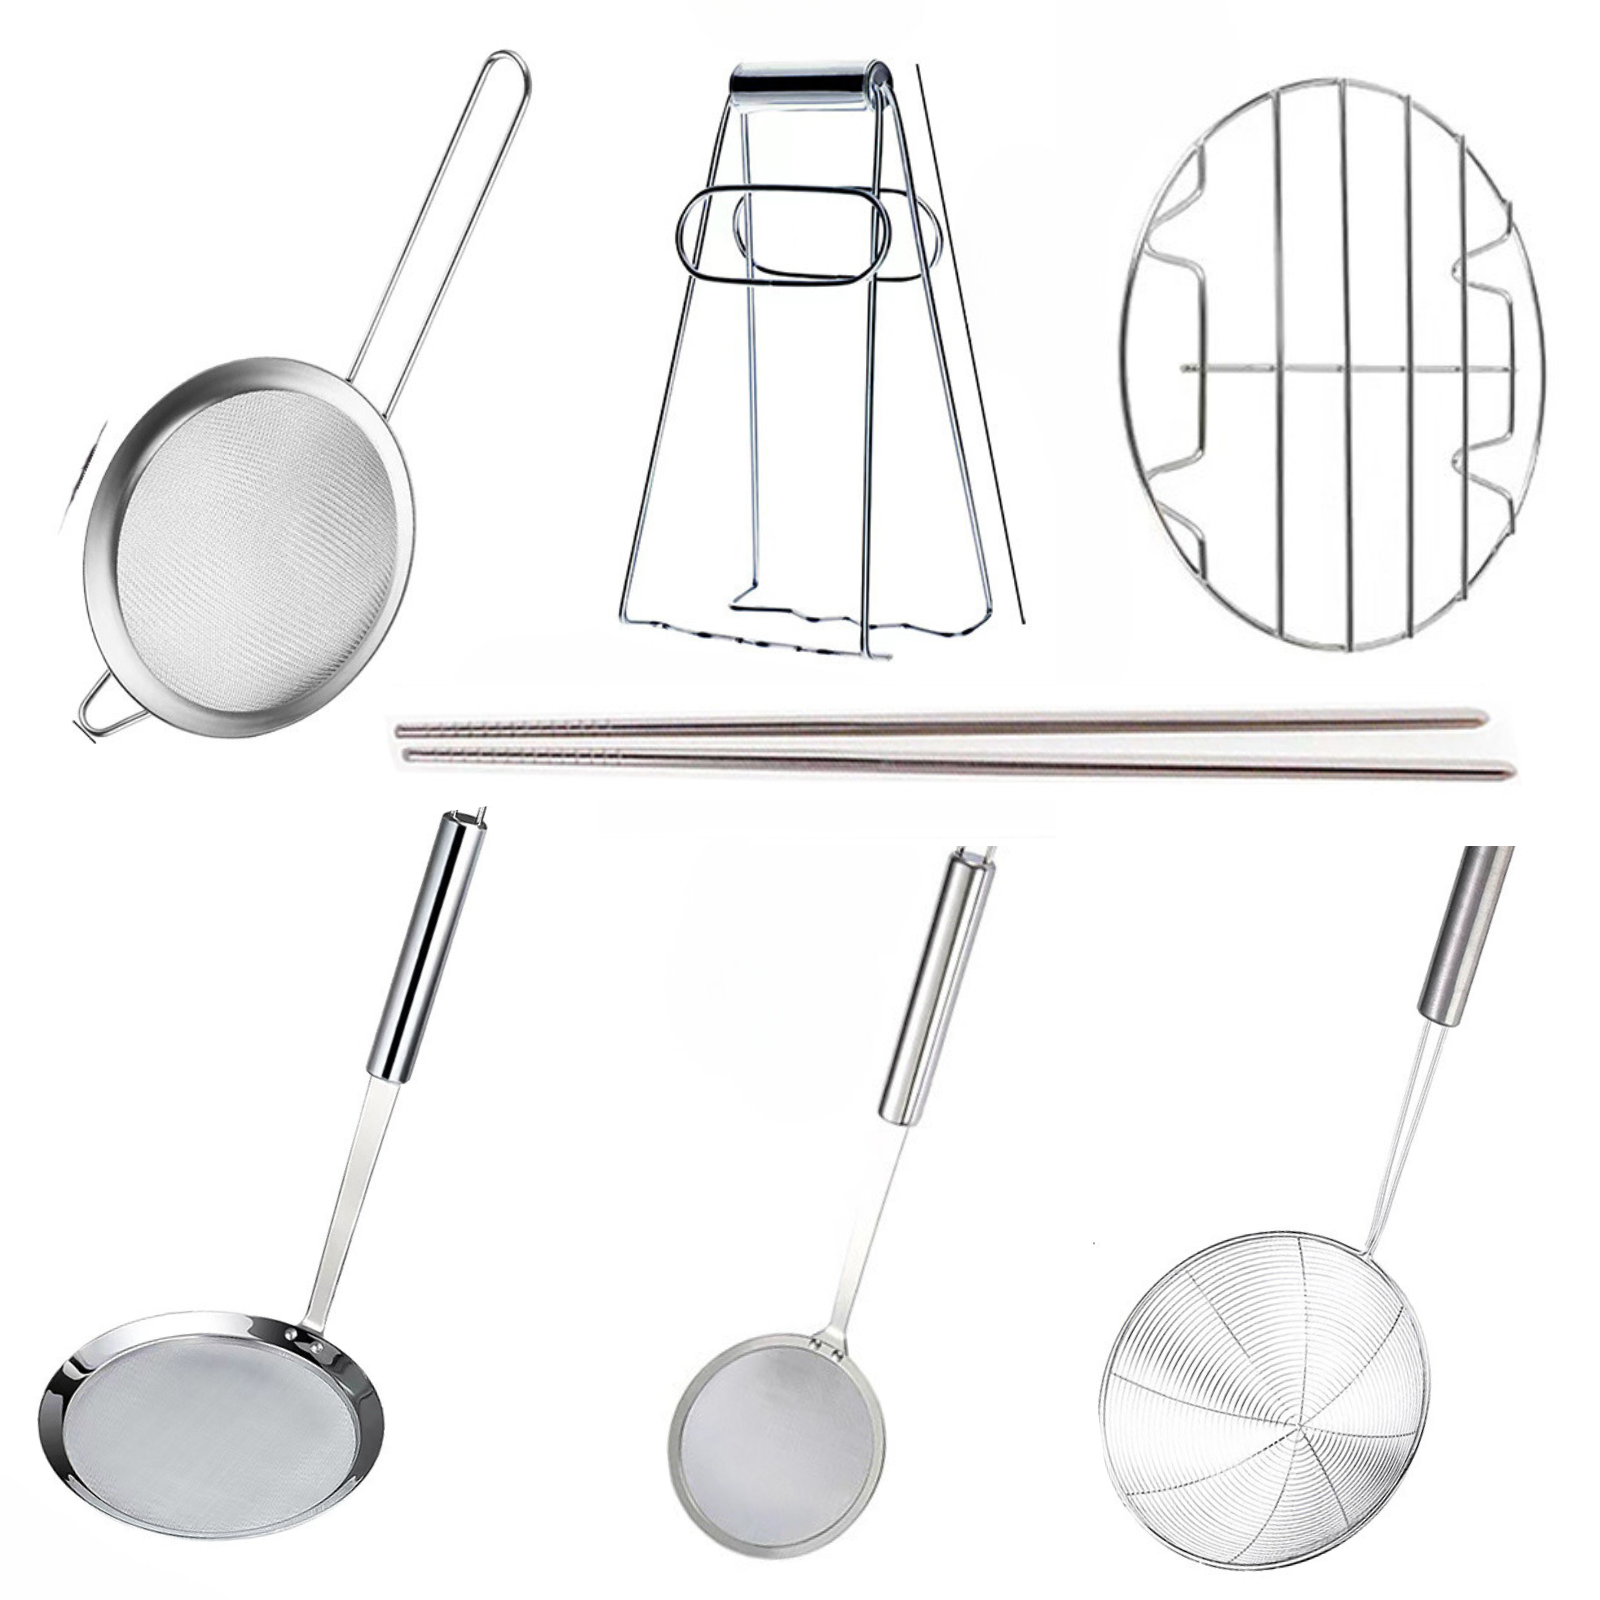 Chinese Cooking Utensil Set (7 Pieces)